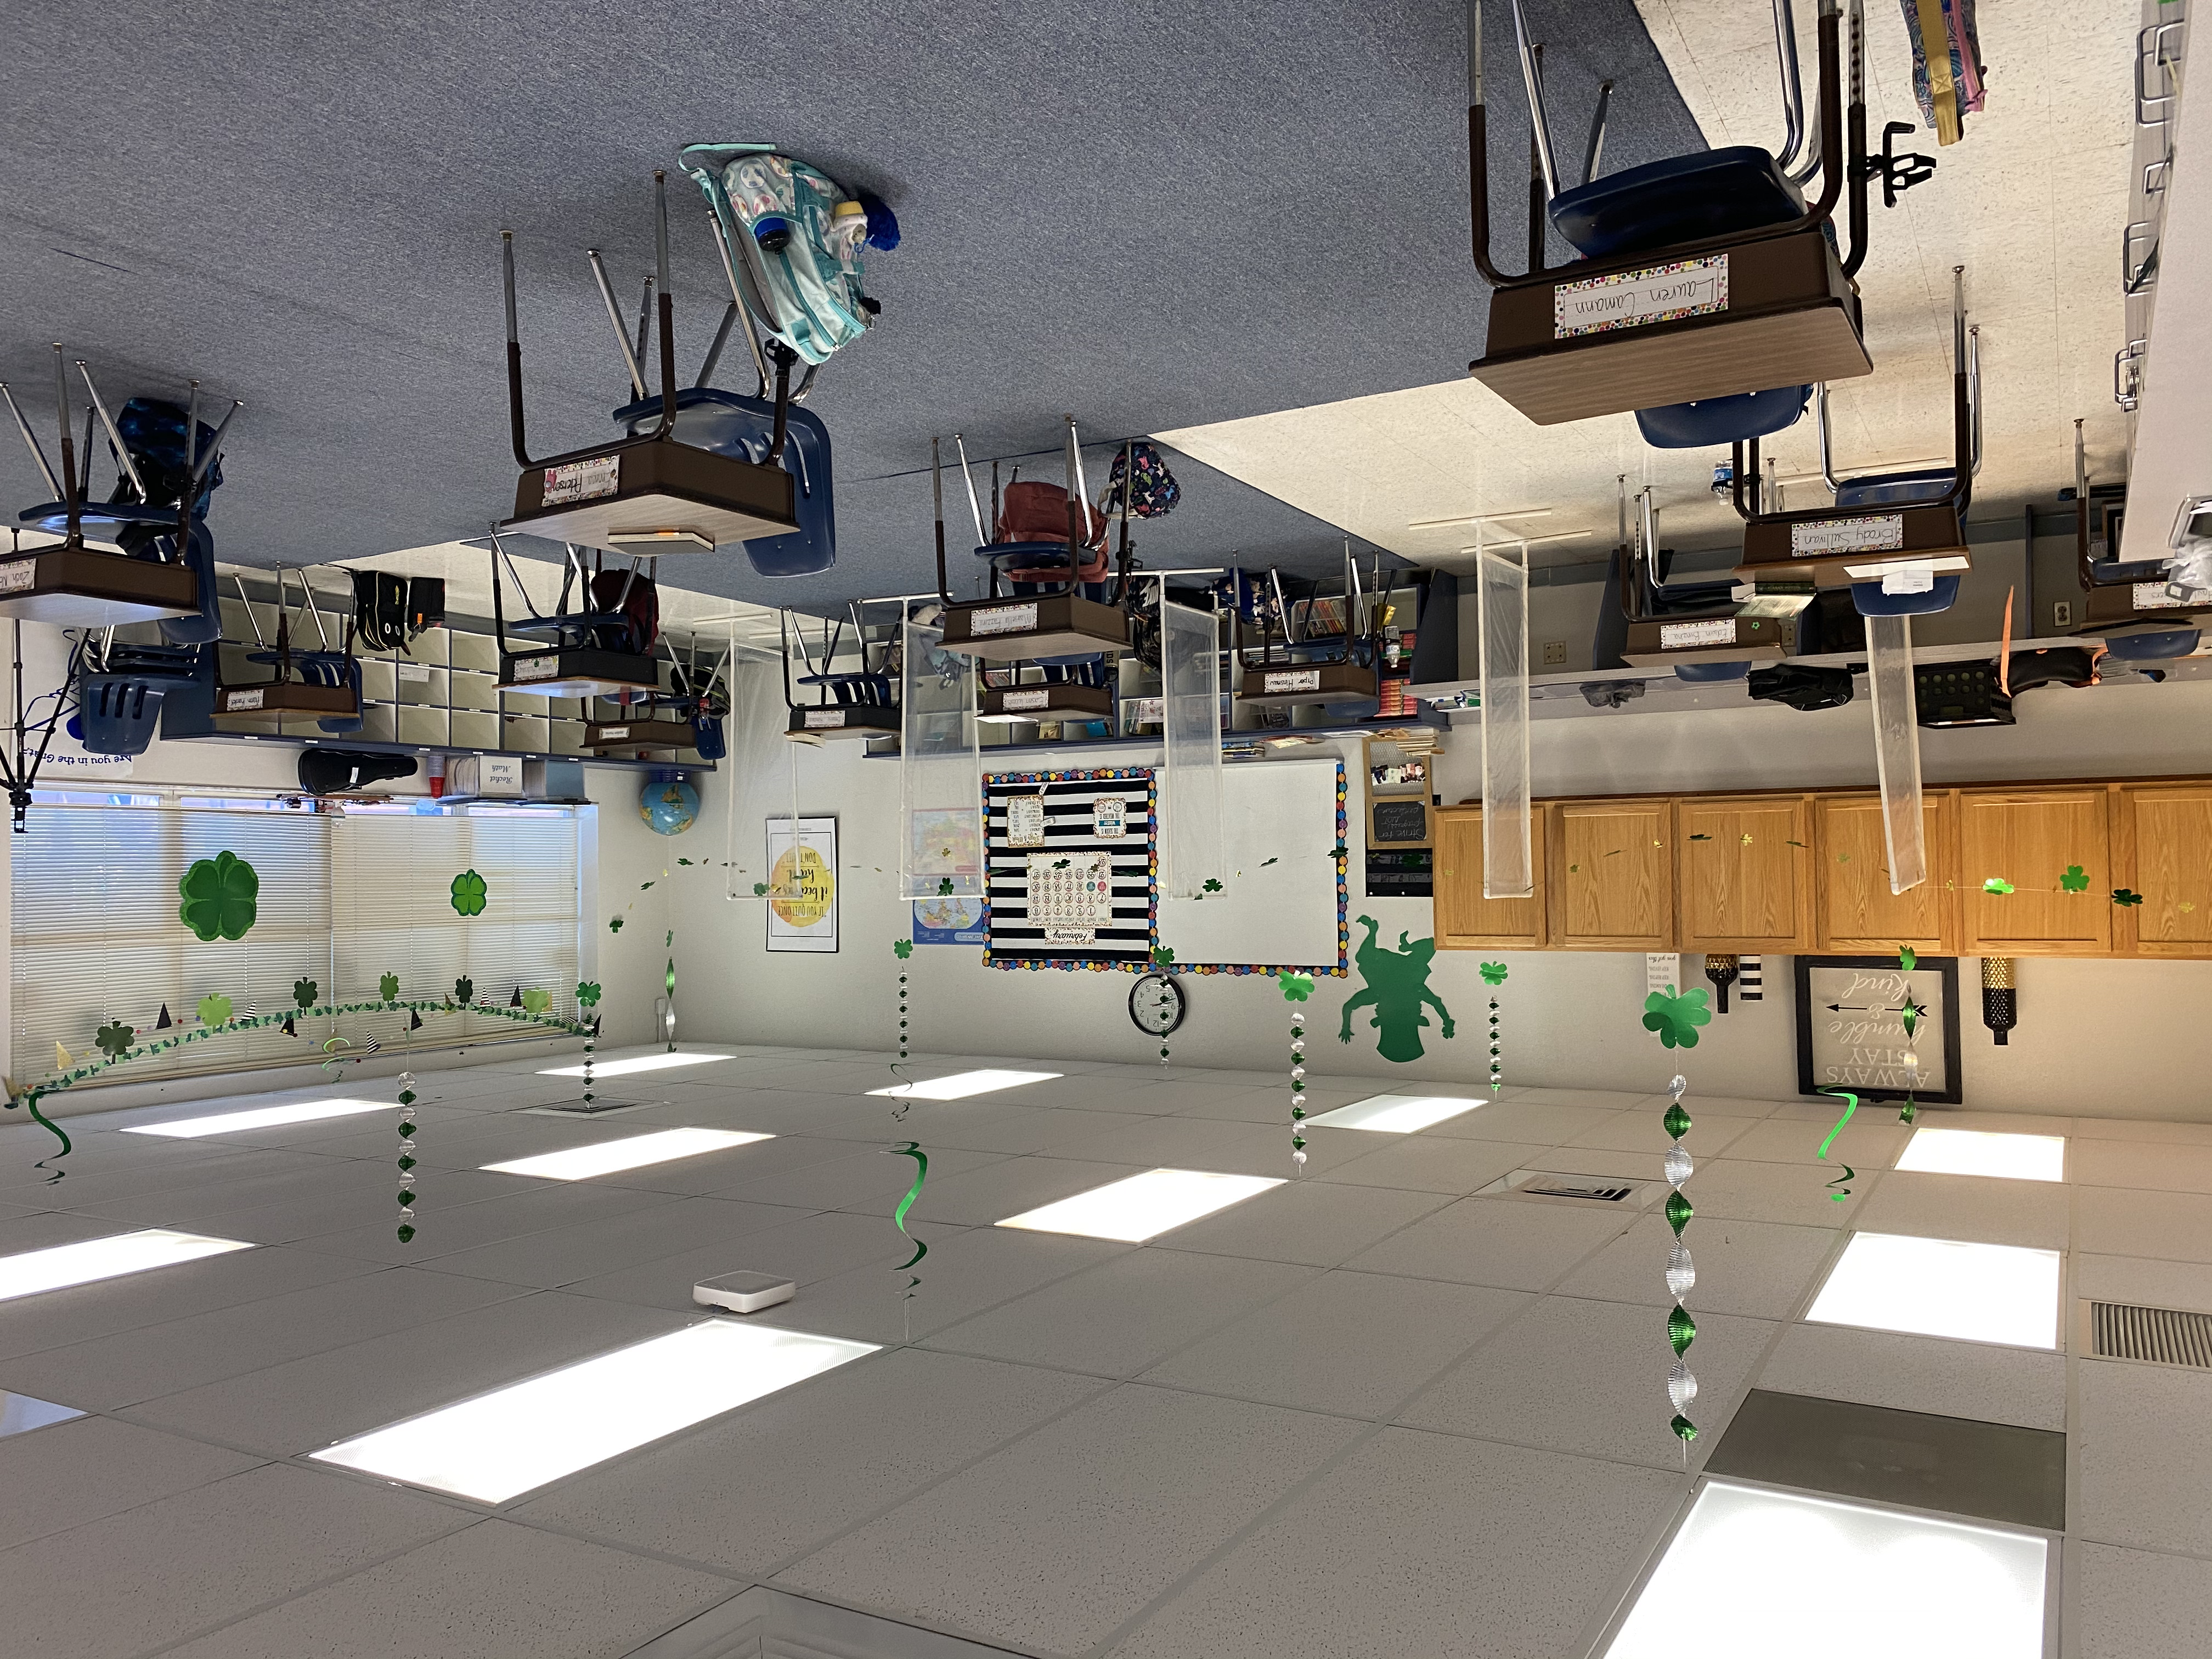 Mrs. Pooley's room after the leprechaun left surprises for the Escape rooms.